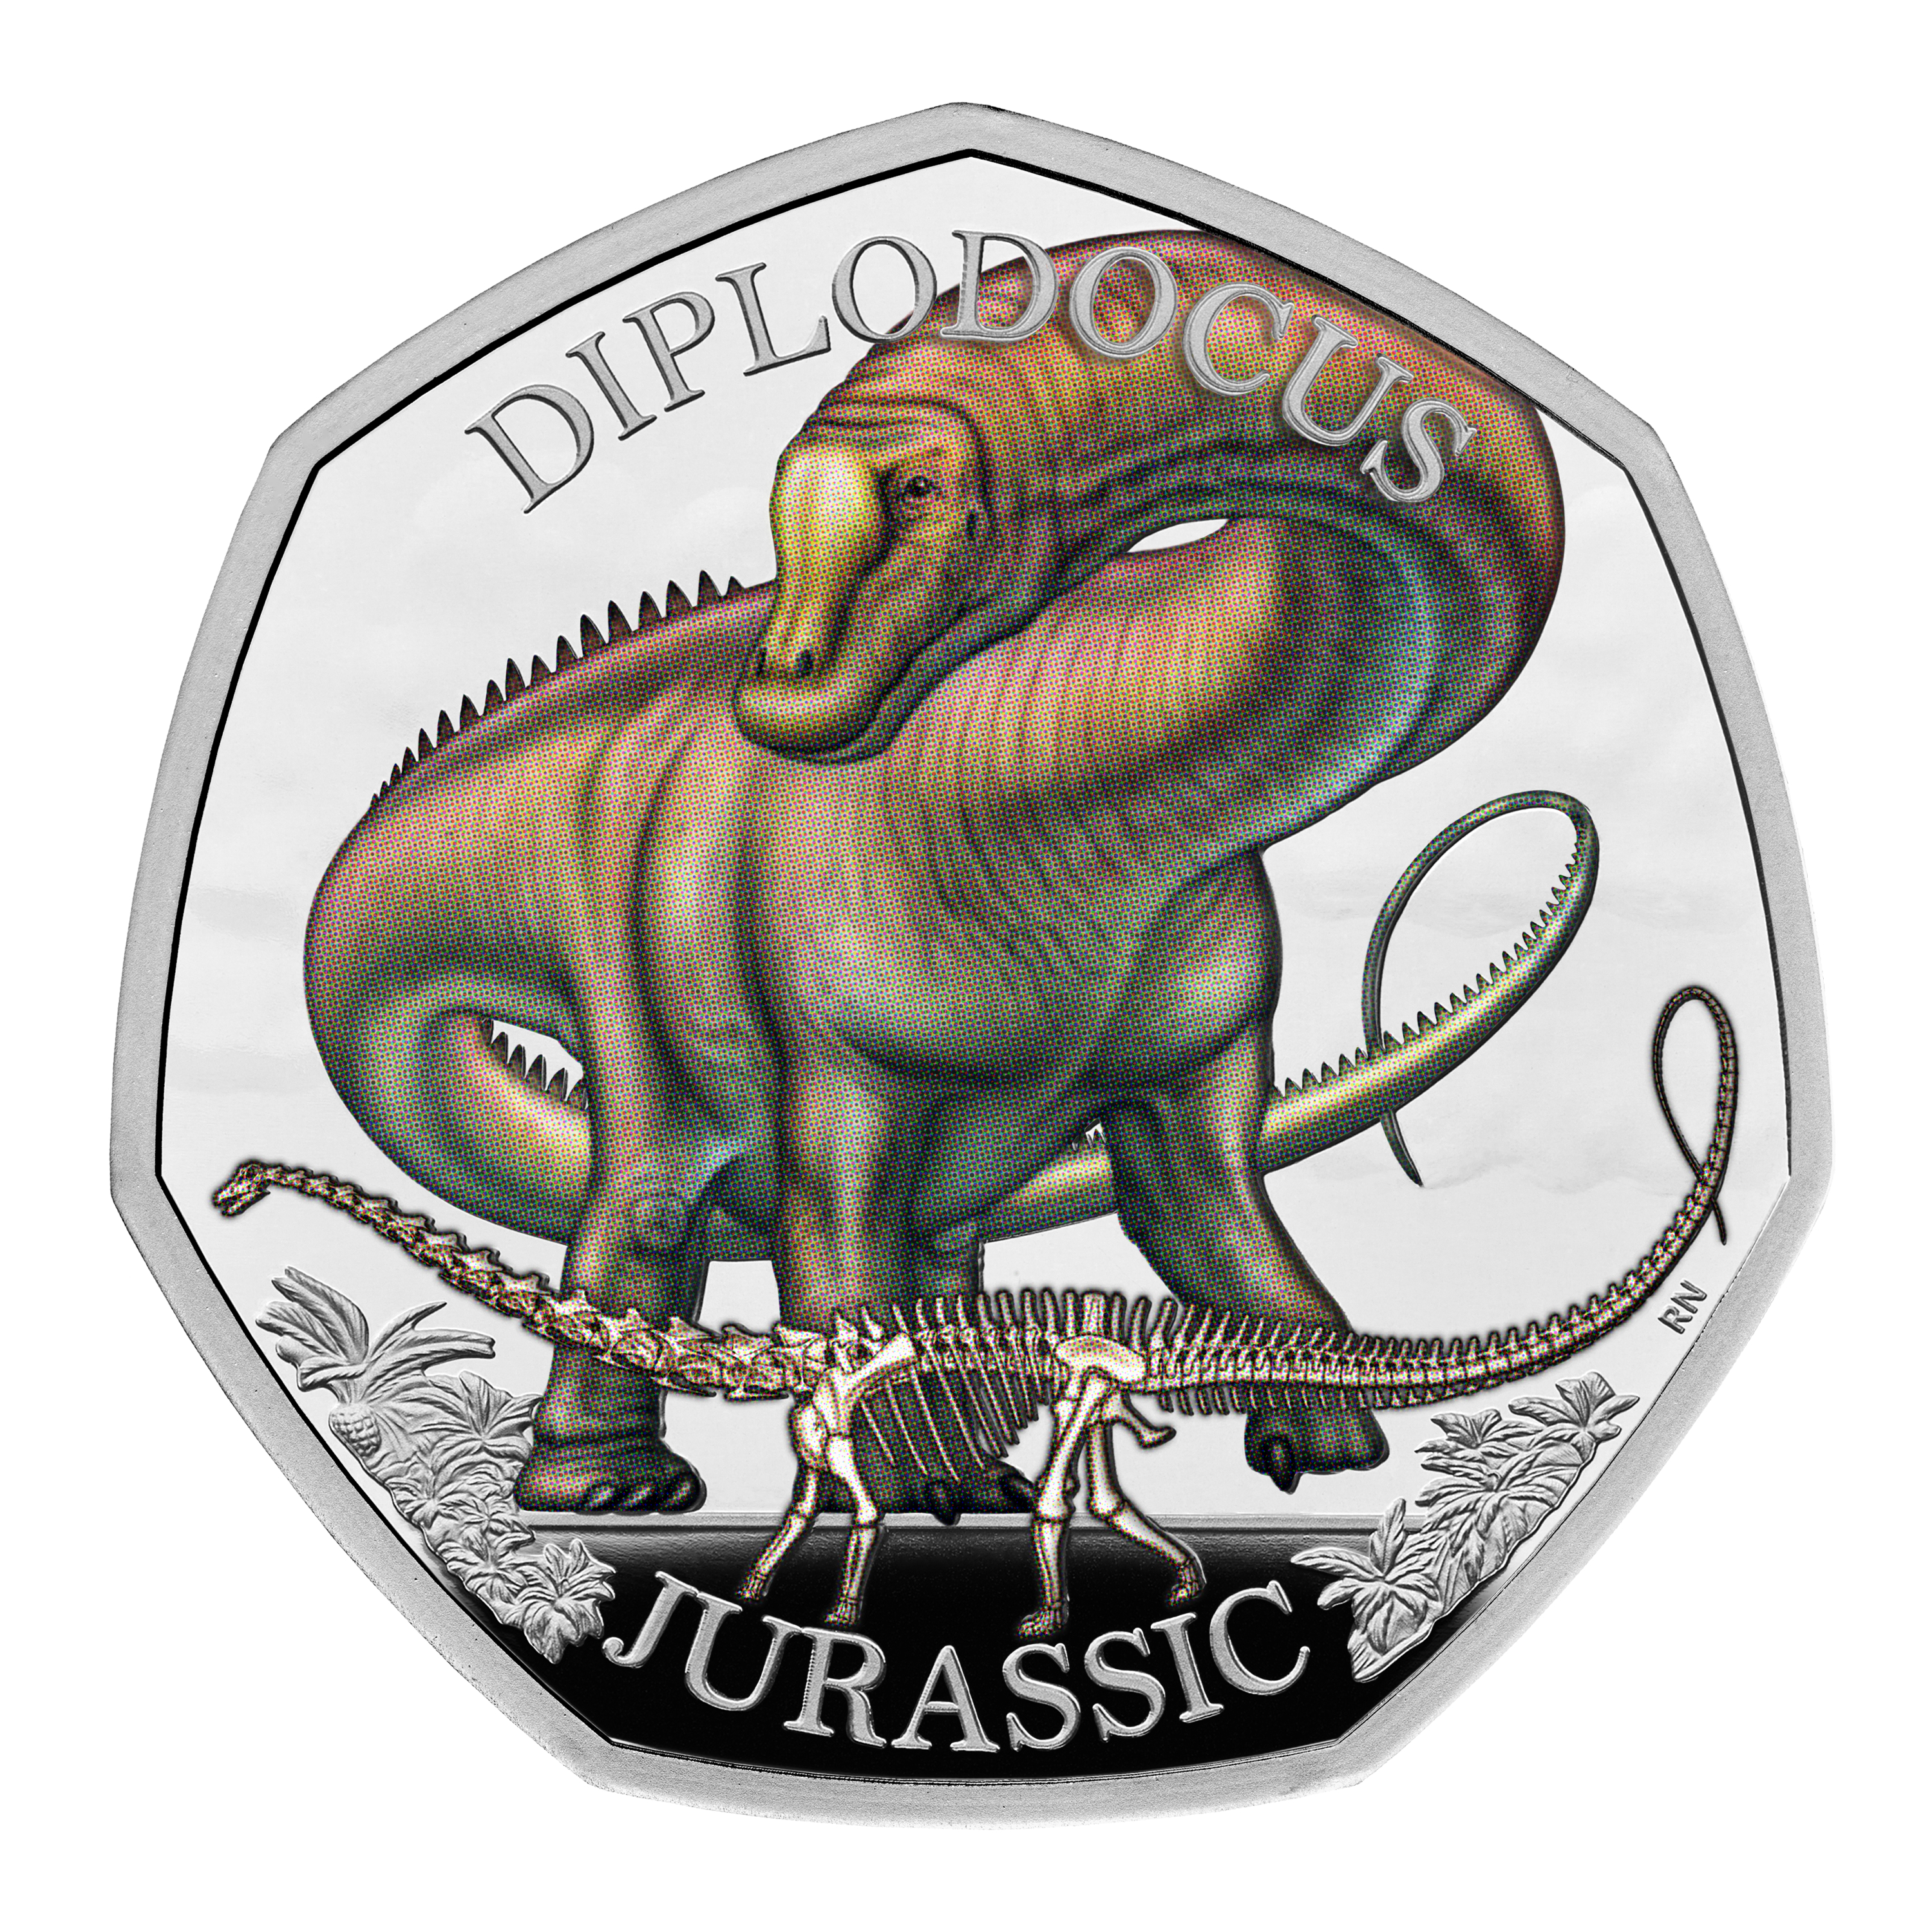 The collection will see the tyrannosaurus, stegosaurus and diplodocus each appear on their own coin.